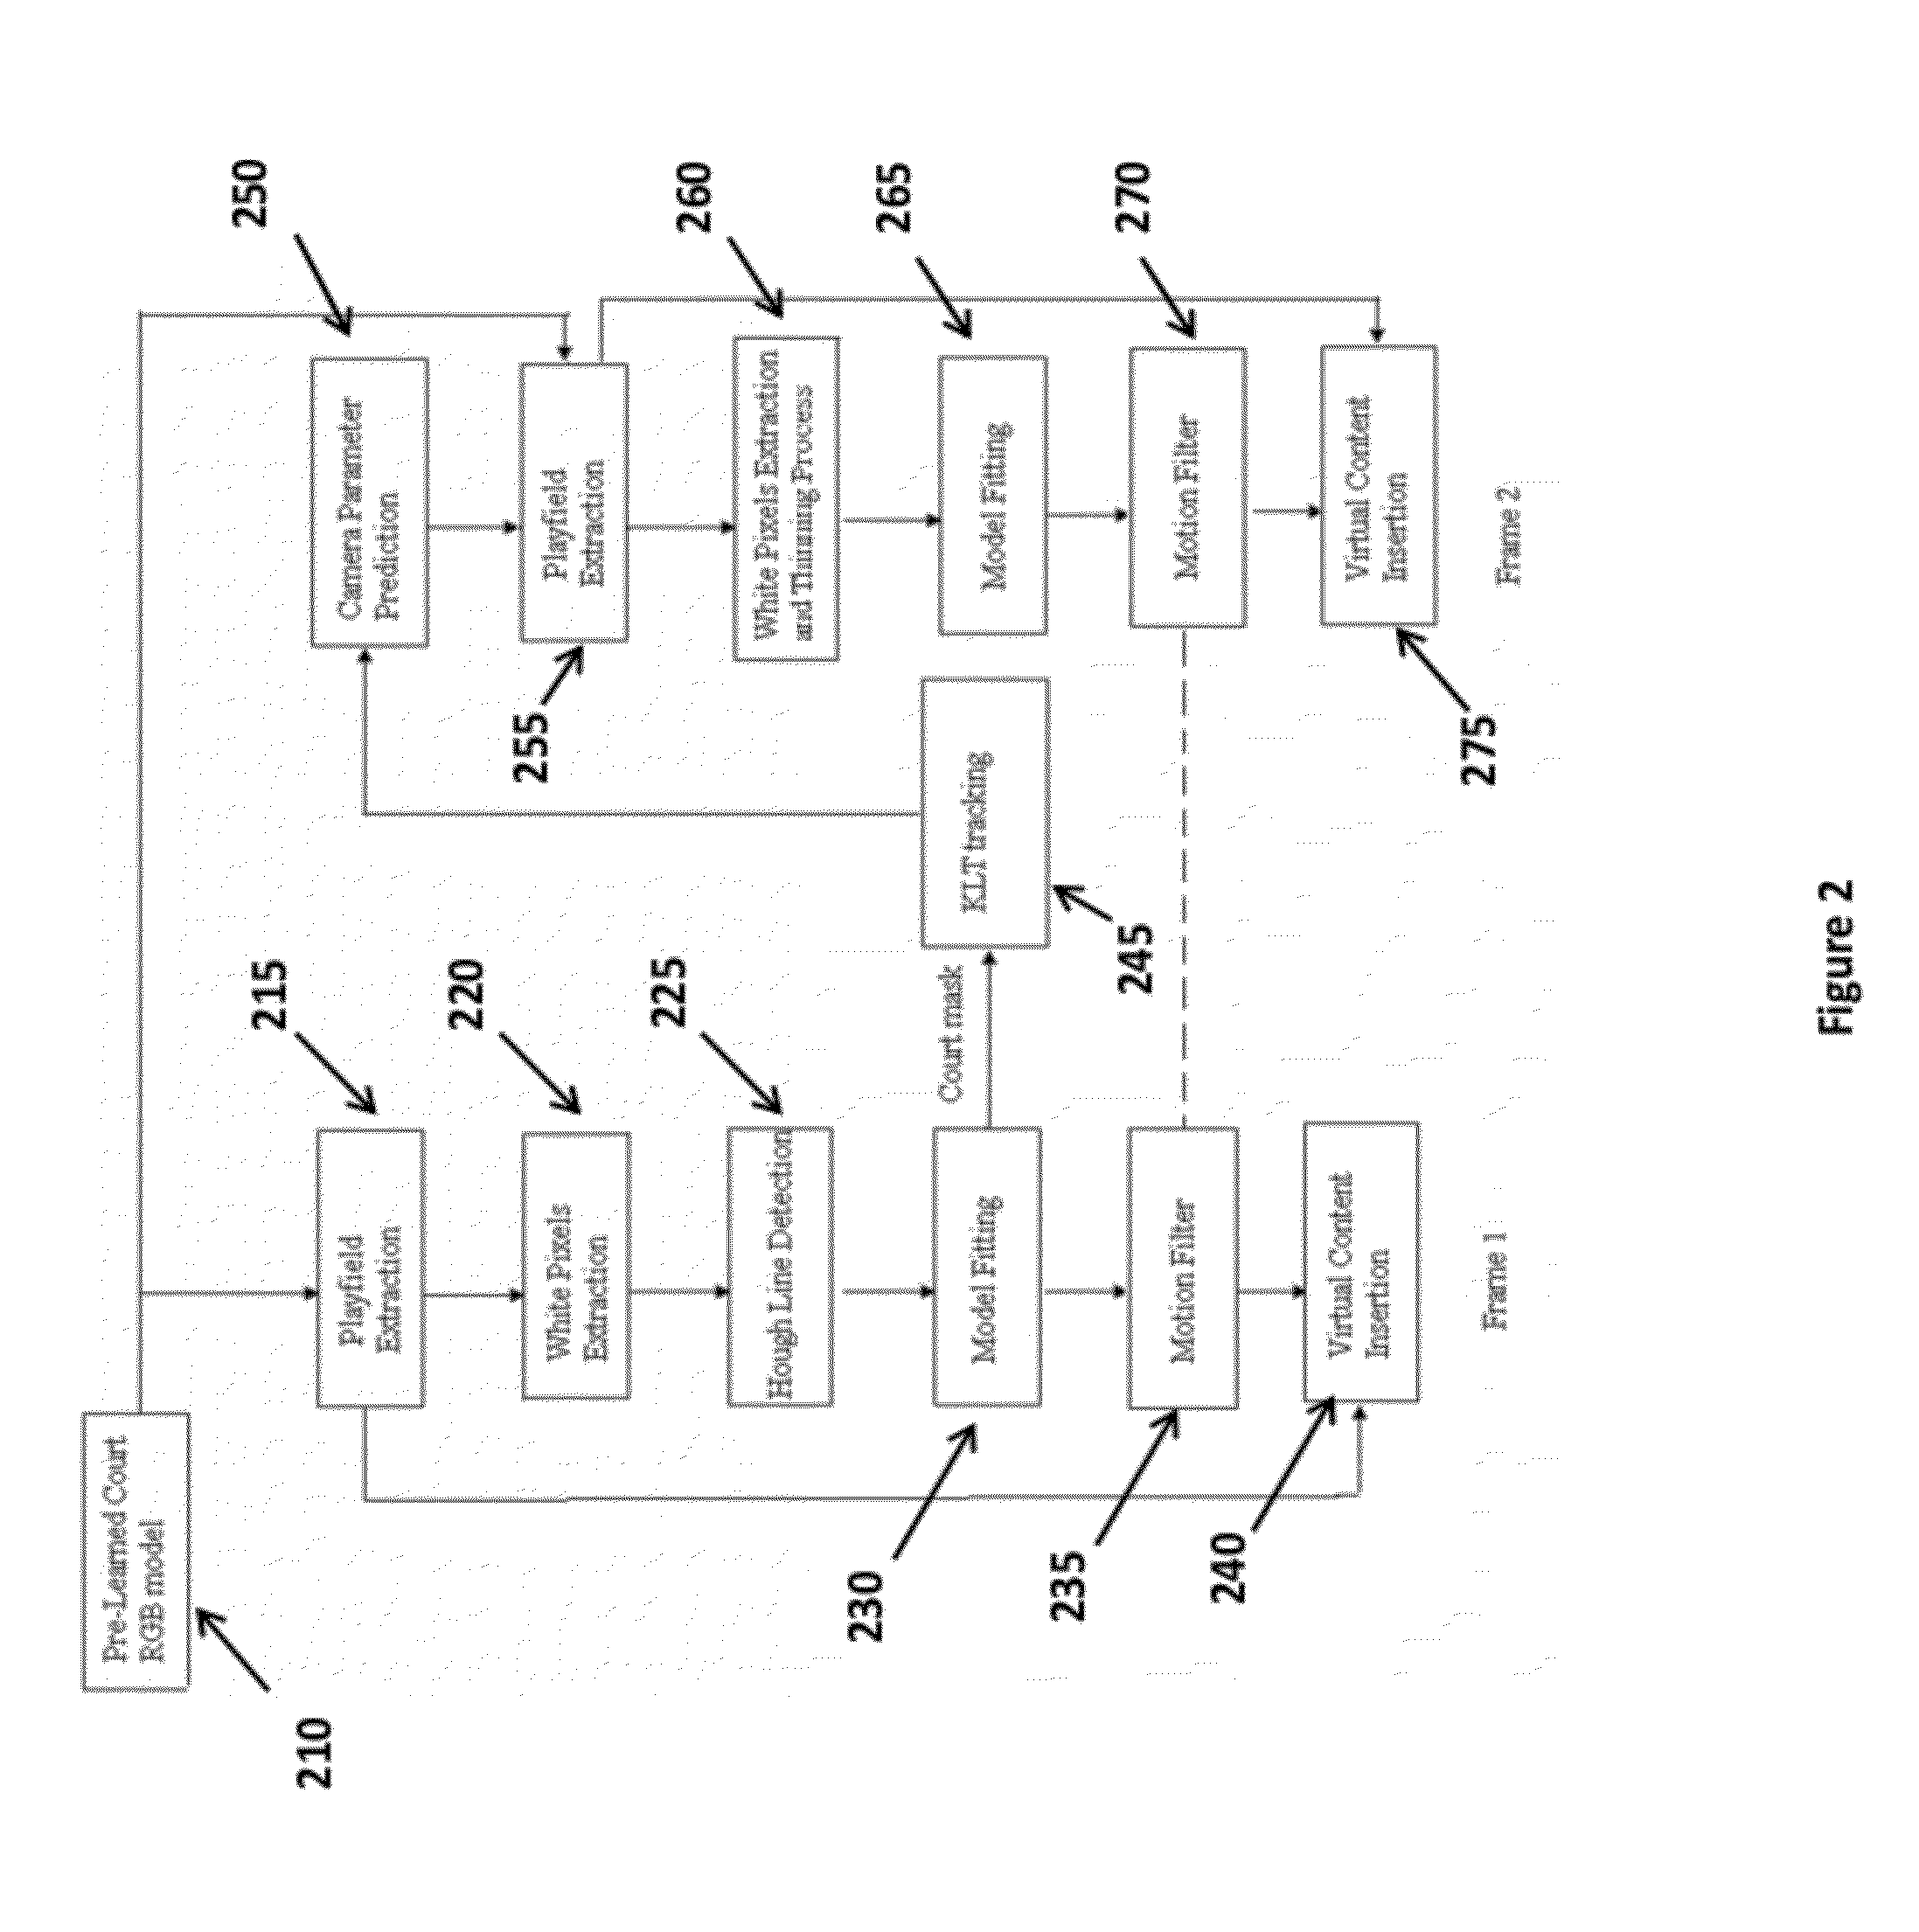 Method and Apparatus for Video Insertion